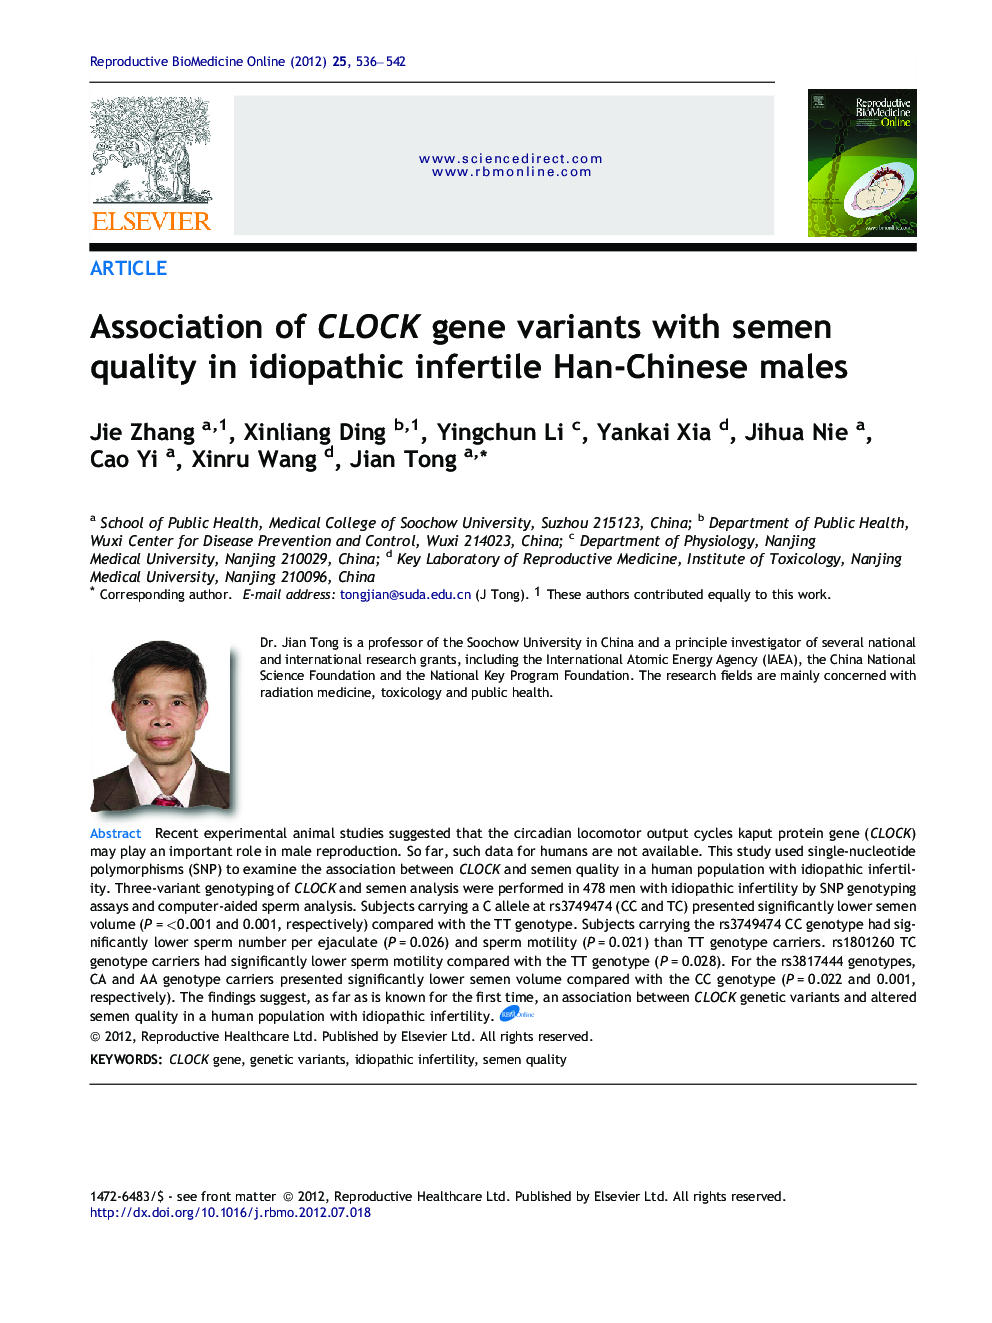 Association of CLOCK gene variants with semen quality in idiopathic infertile Han-Chinese males 